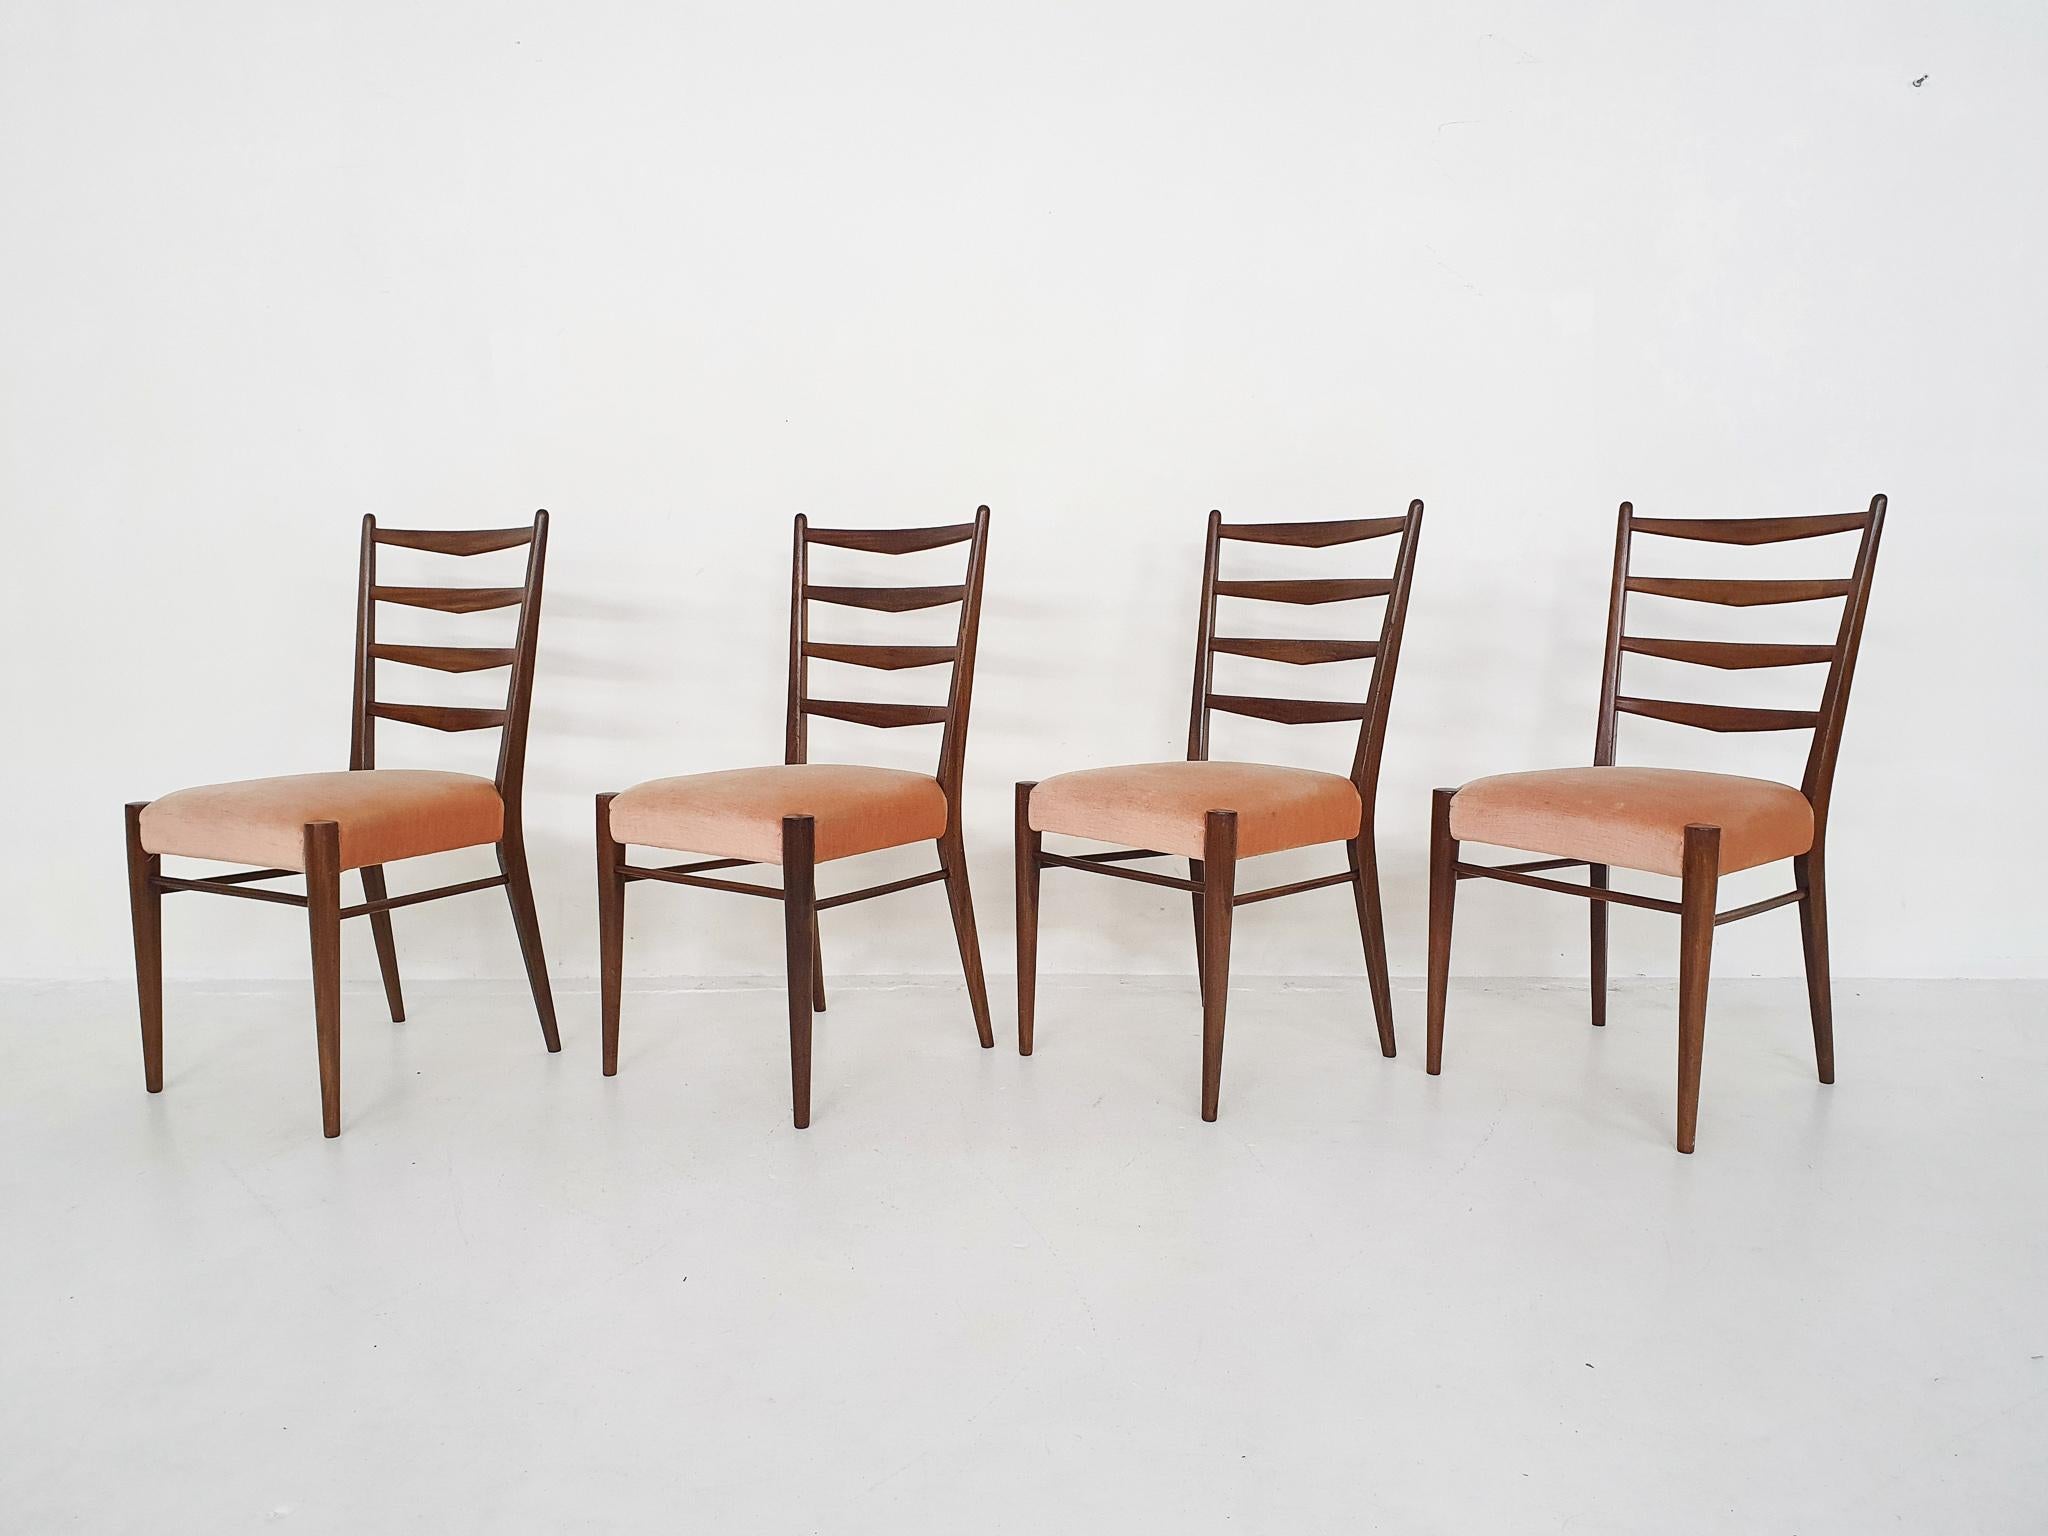 Four teak dining chairs with pink vlevet upholstery. The upholstery is a bit dis-colored. It is possible to have the chairs re-upholstered.
The teak frames are in good firm condition.